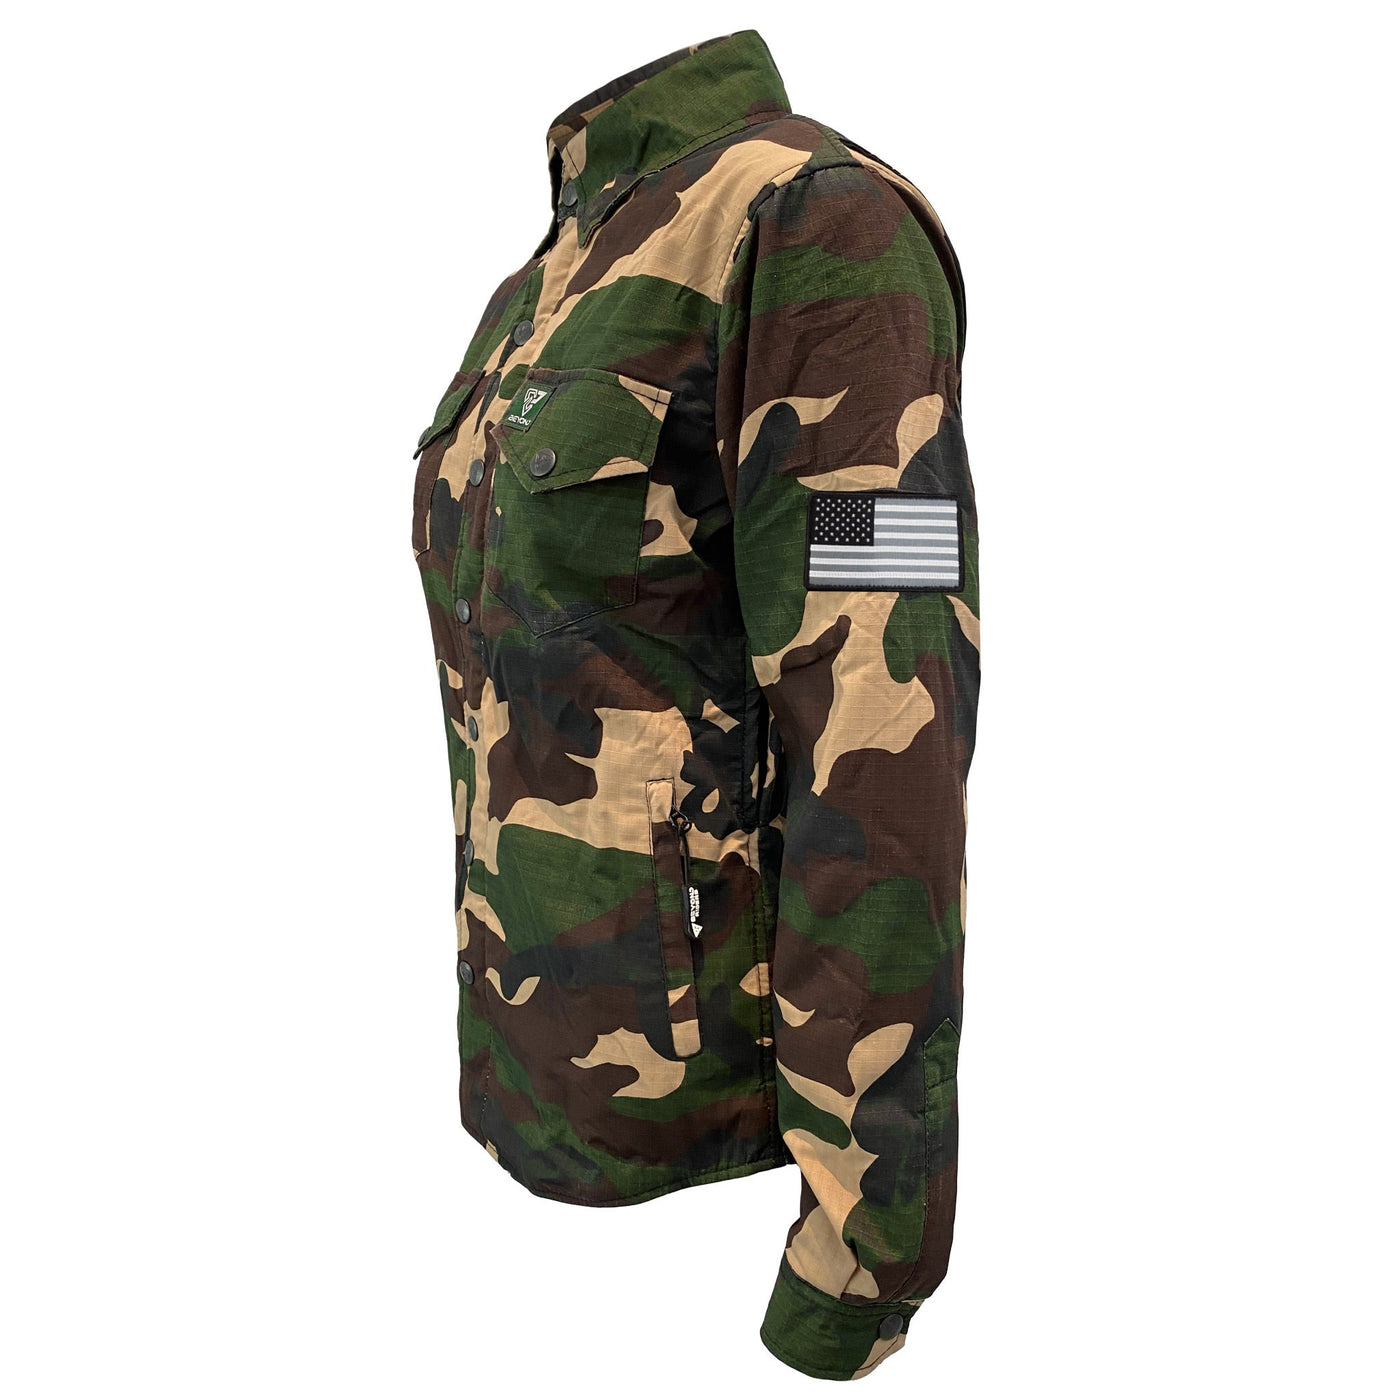 Protective Camouflage Shirt with Pads for Women "Knight Hawk" - Dark Color